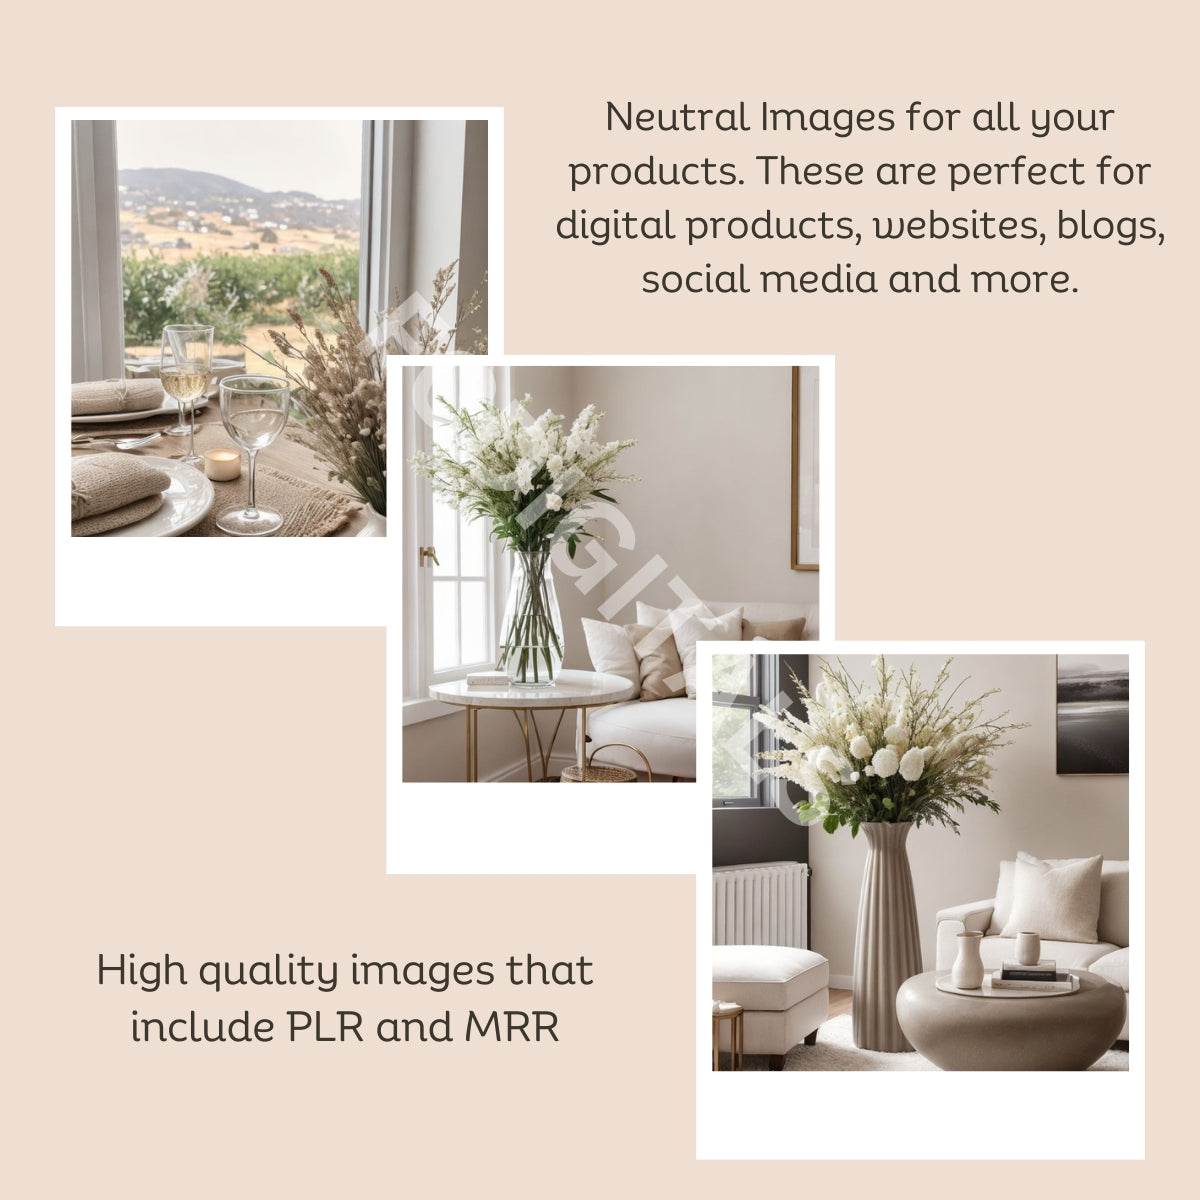 Neutral Stock Photos, Master Resell Rights, Neutral Aesthetic Images, Stock Photography Bundle. PLR and MRR Photos, French Country Stock Images